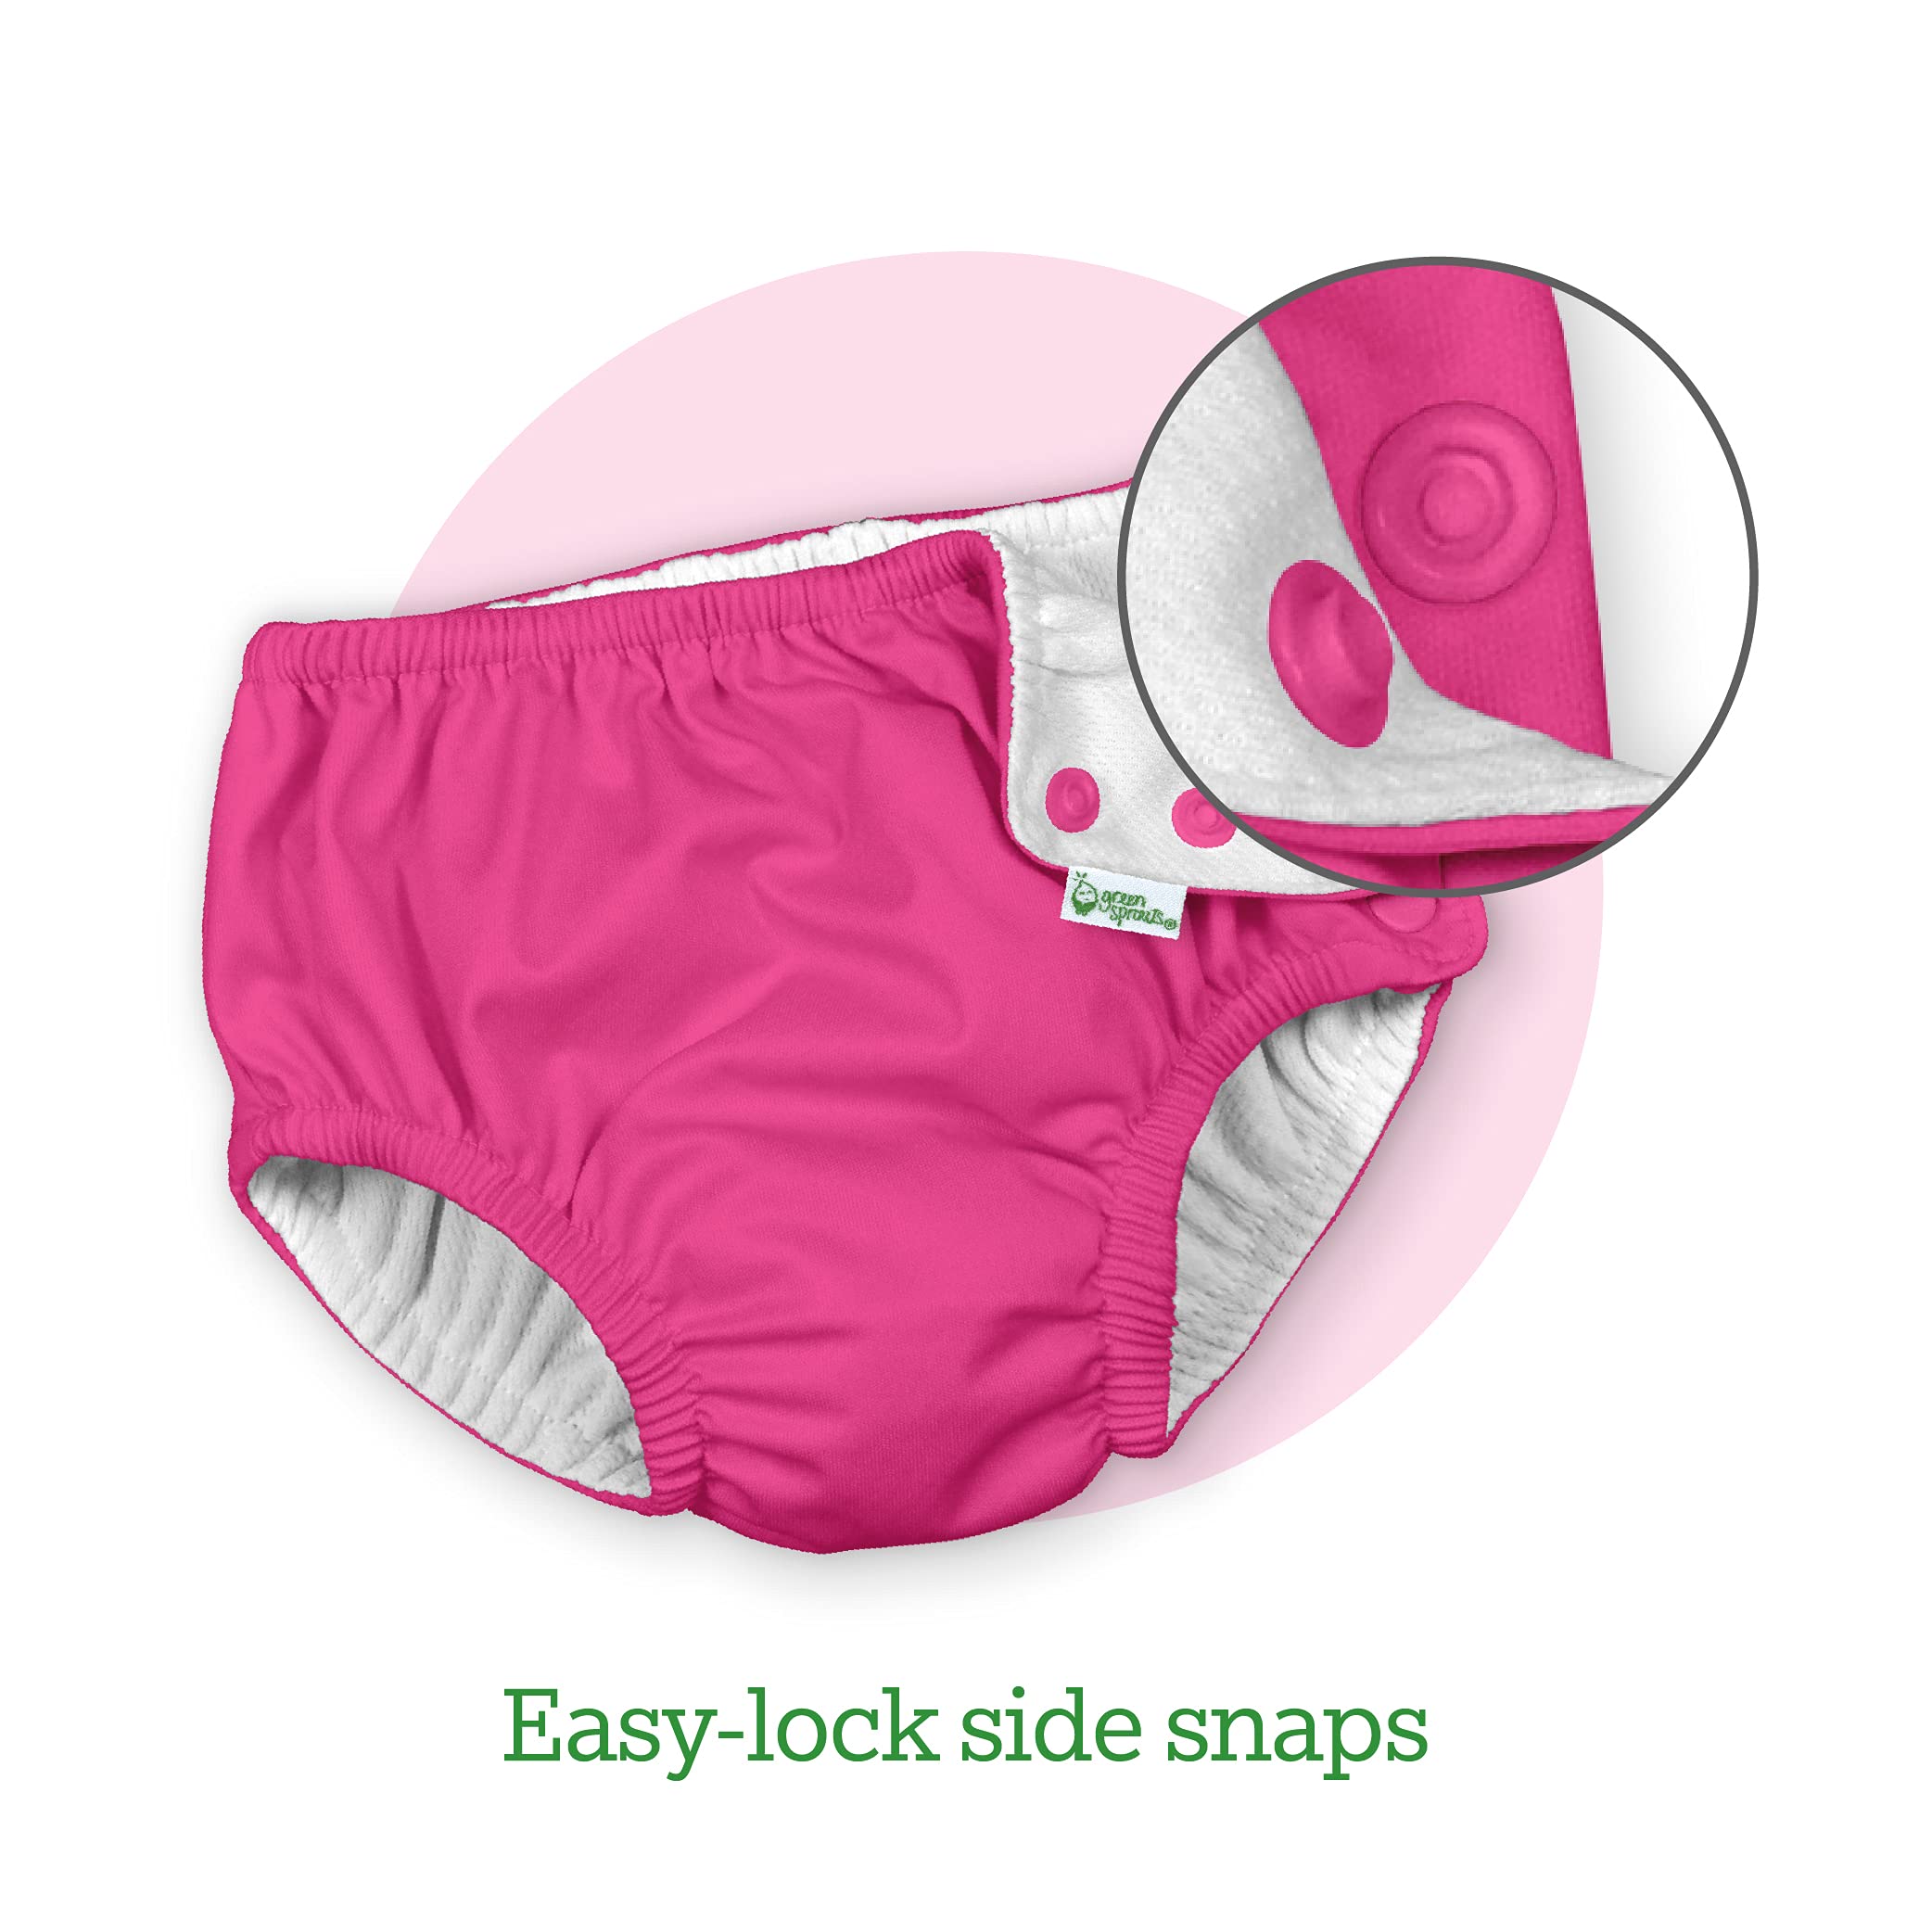 i play. Baby-Girls Ruffle Snap Reusable Absorbent Swimsuit Diaper